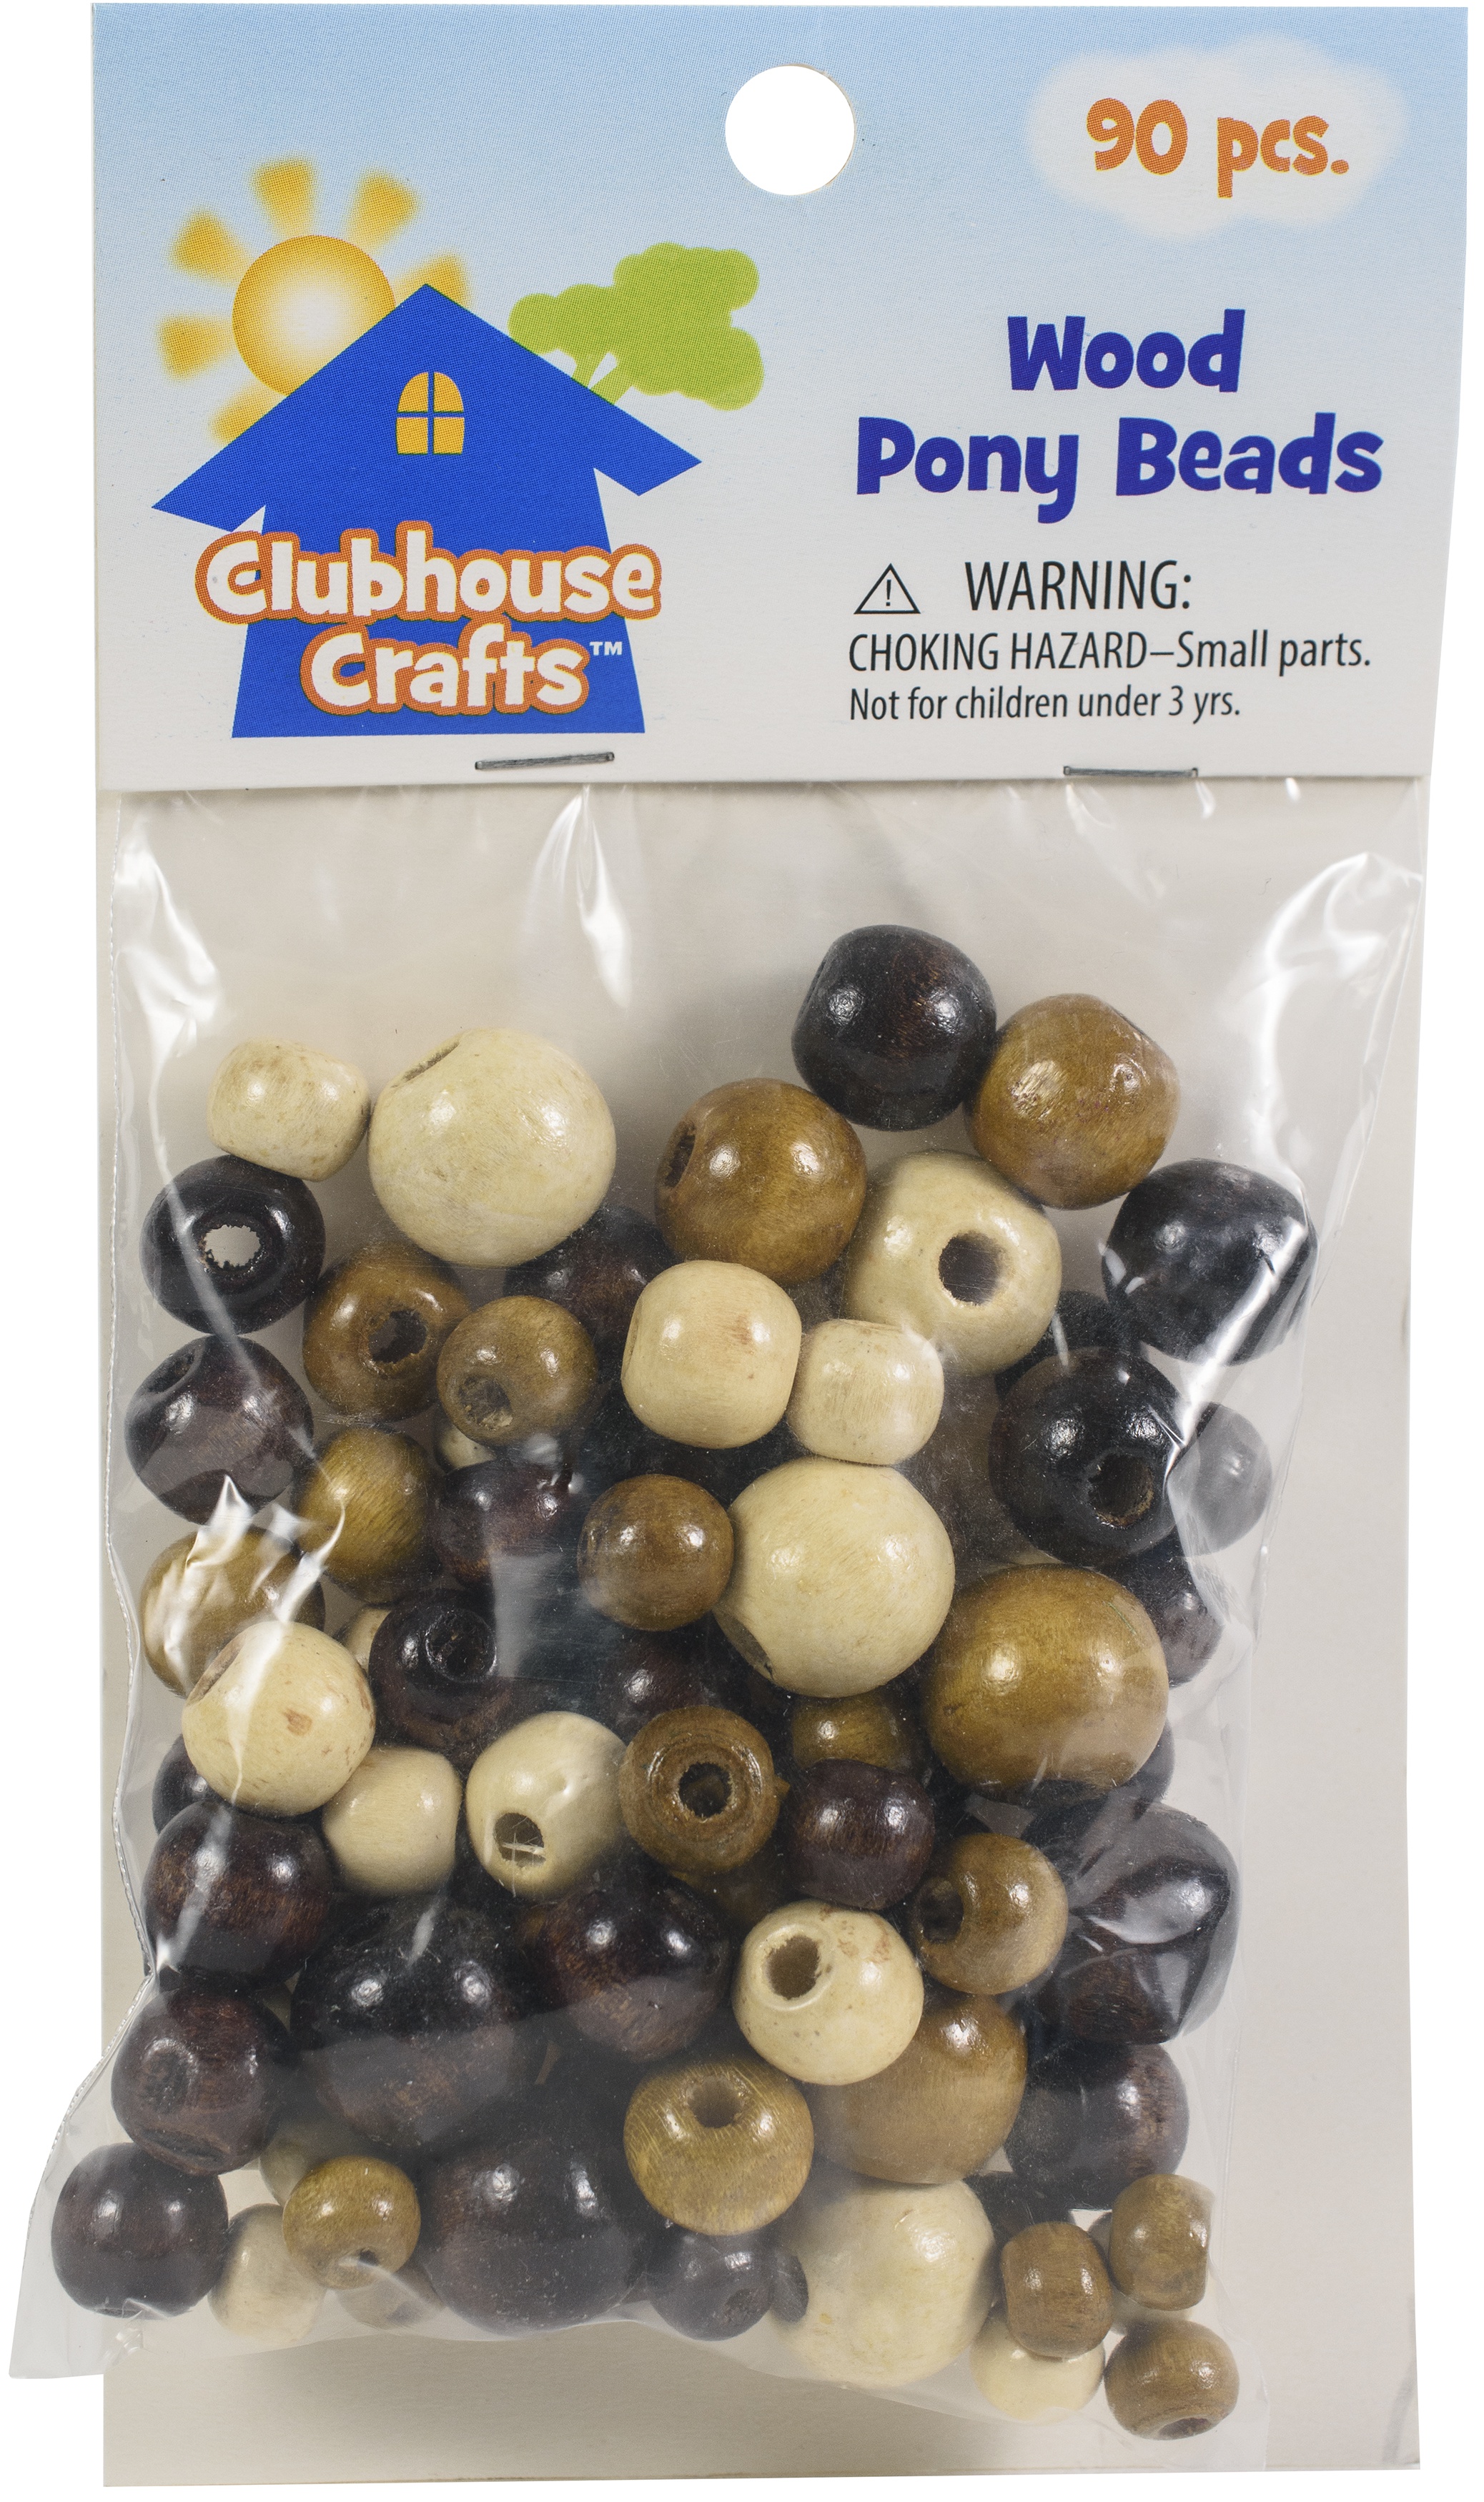 6 Pack Award-winning store Clubhouse Crafts Wood 90 Max 67% OFF Pony Beads -89001-25 Pkg